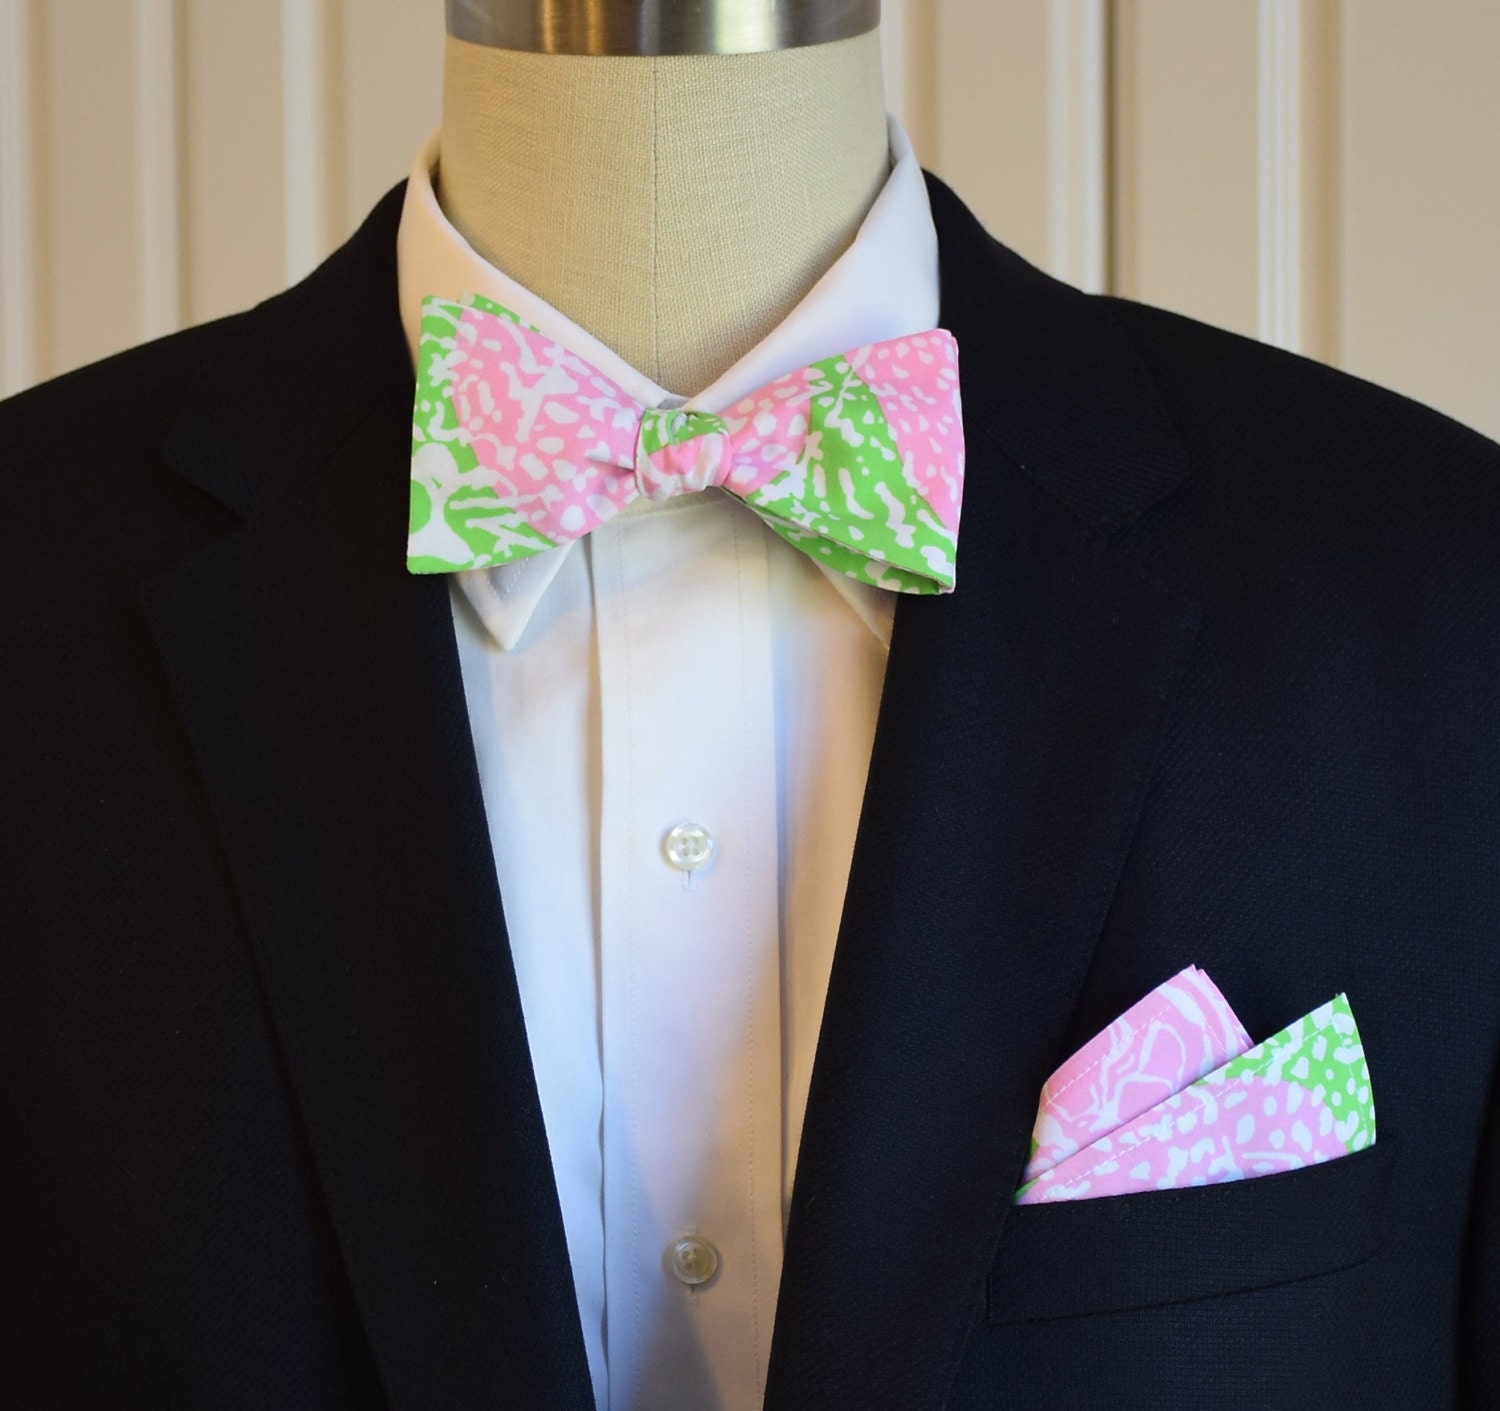 Pocket Square & Bow Tie, pink/green abstract floral print, wedding ...